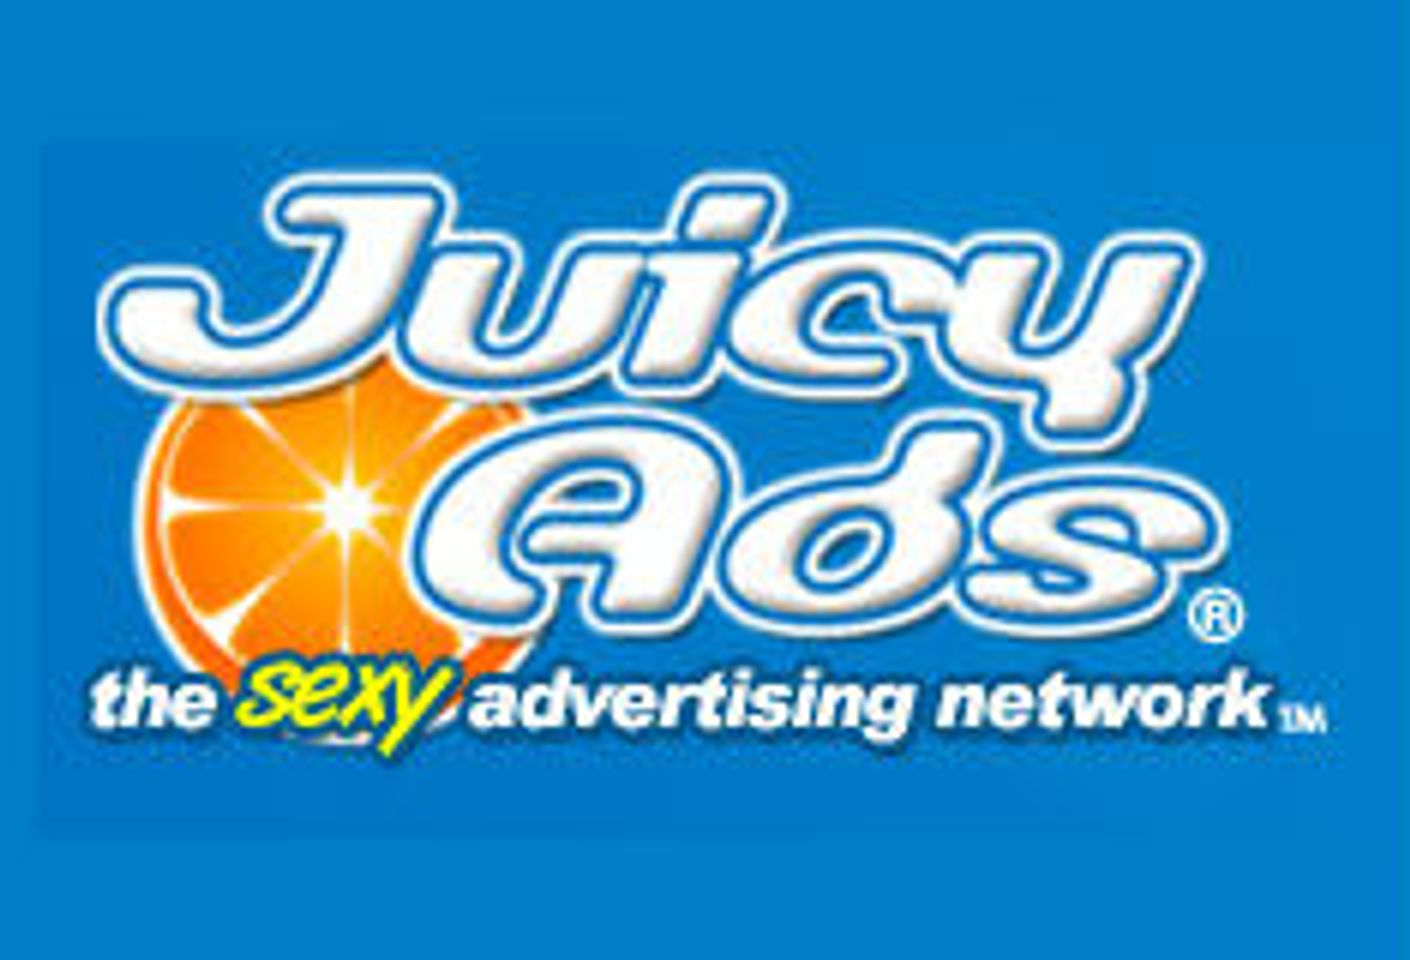 JuicyAds Targets ROI with Upgrades to Mobile Filters, Targeting Technology